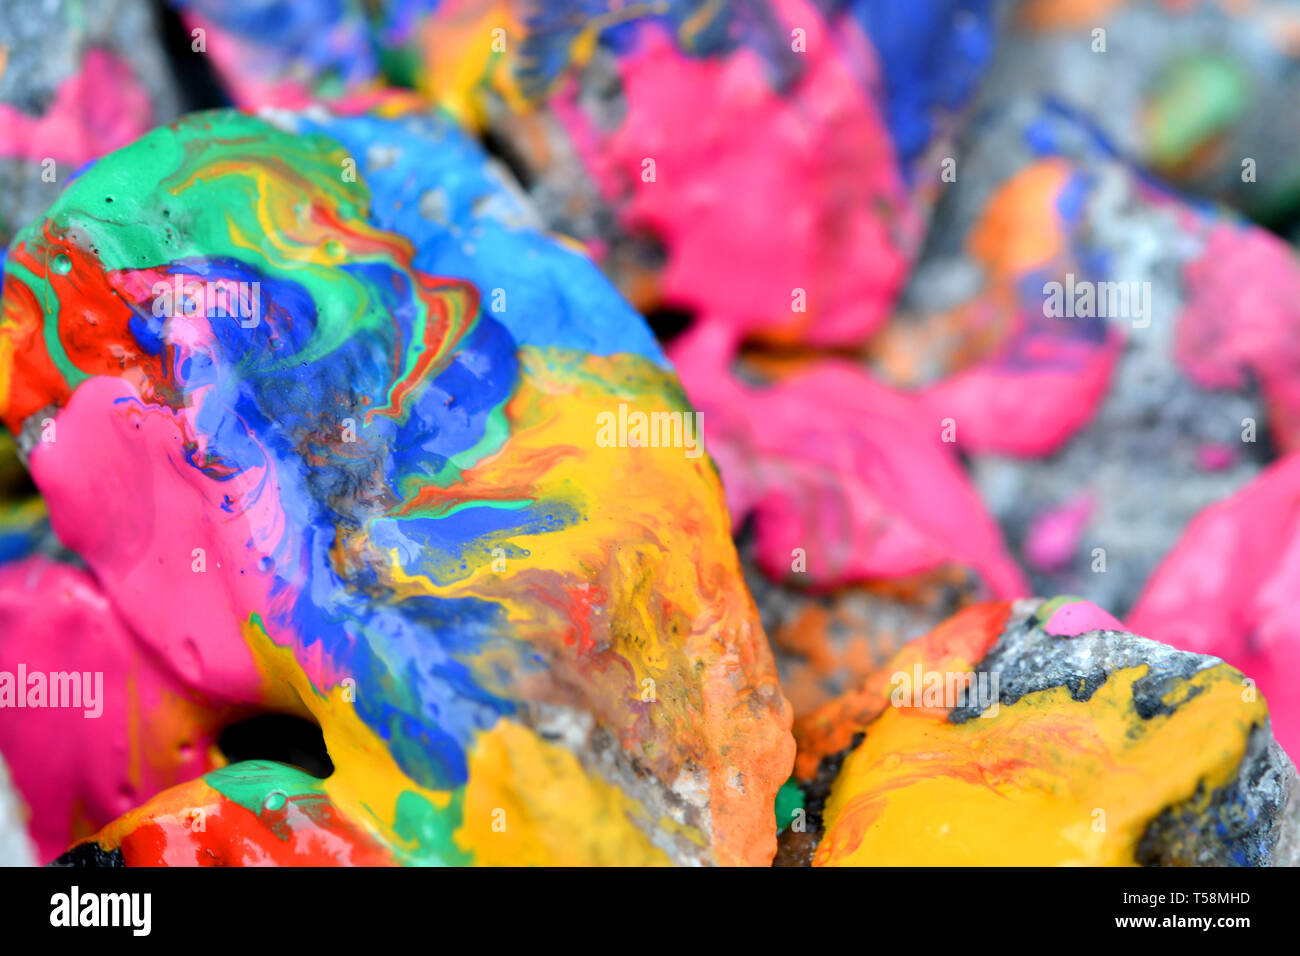 rocks covered with colorful paint close-up. Stones in the paint with streaks. Abstract background Stock Photo